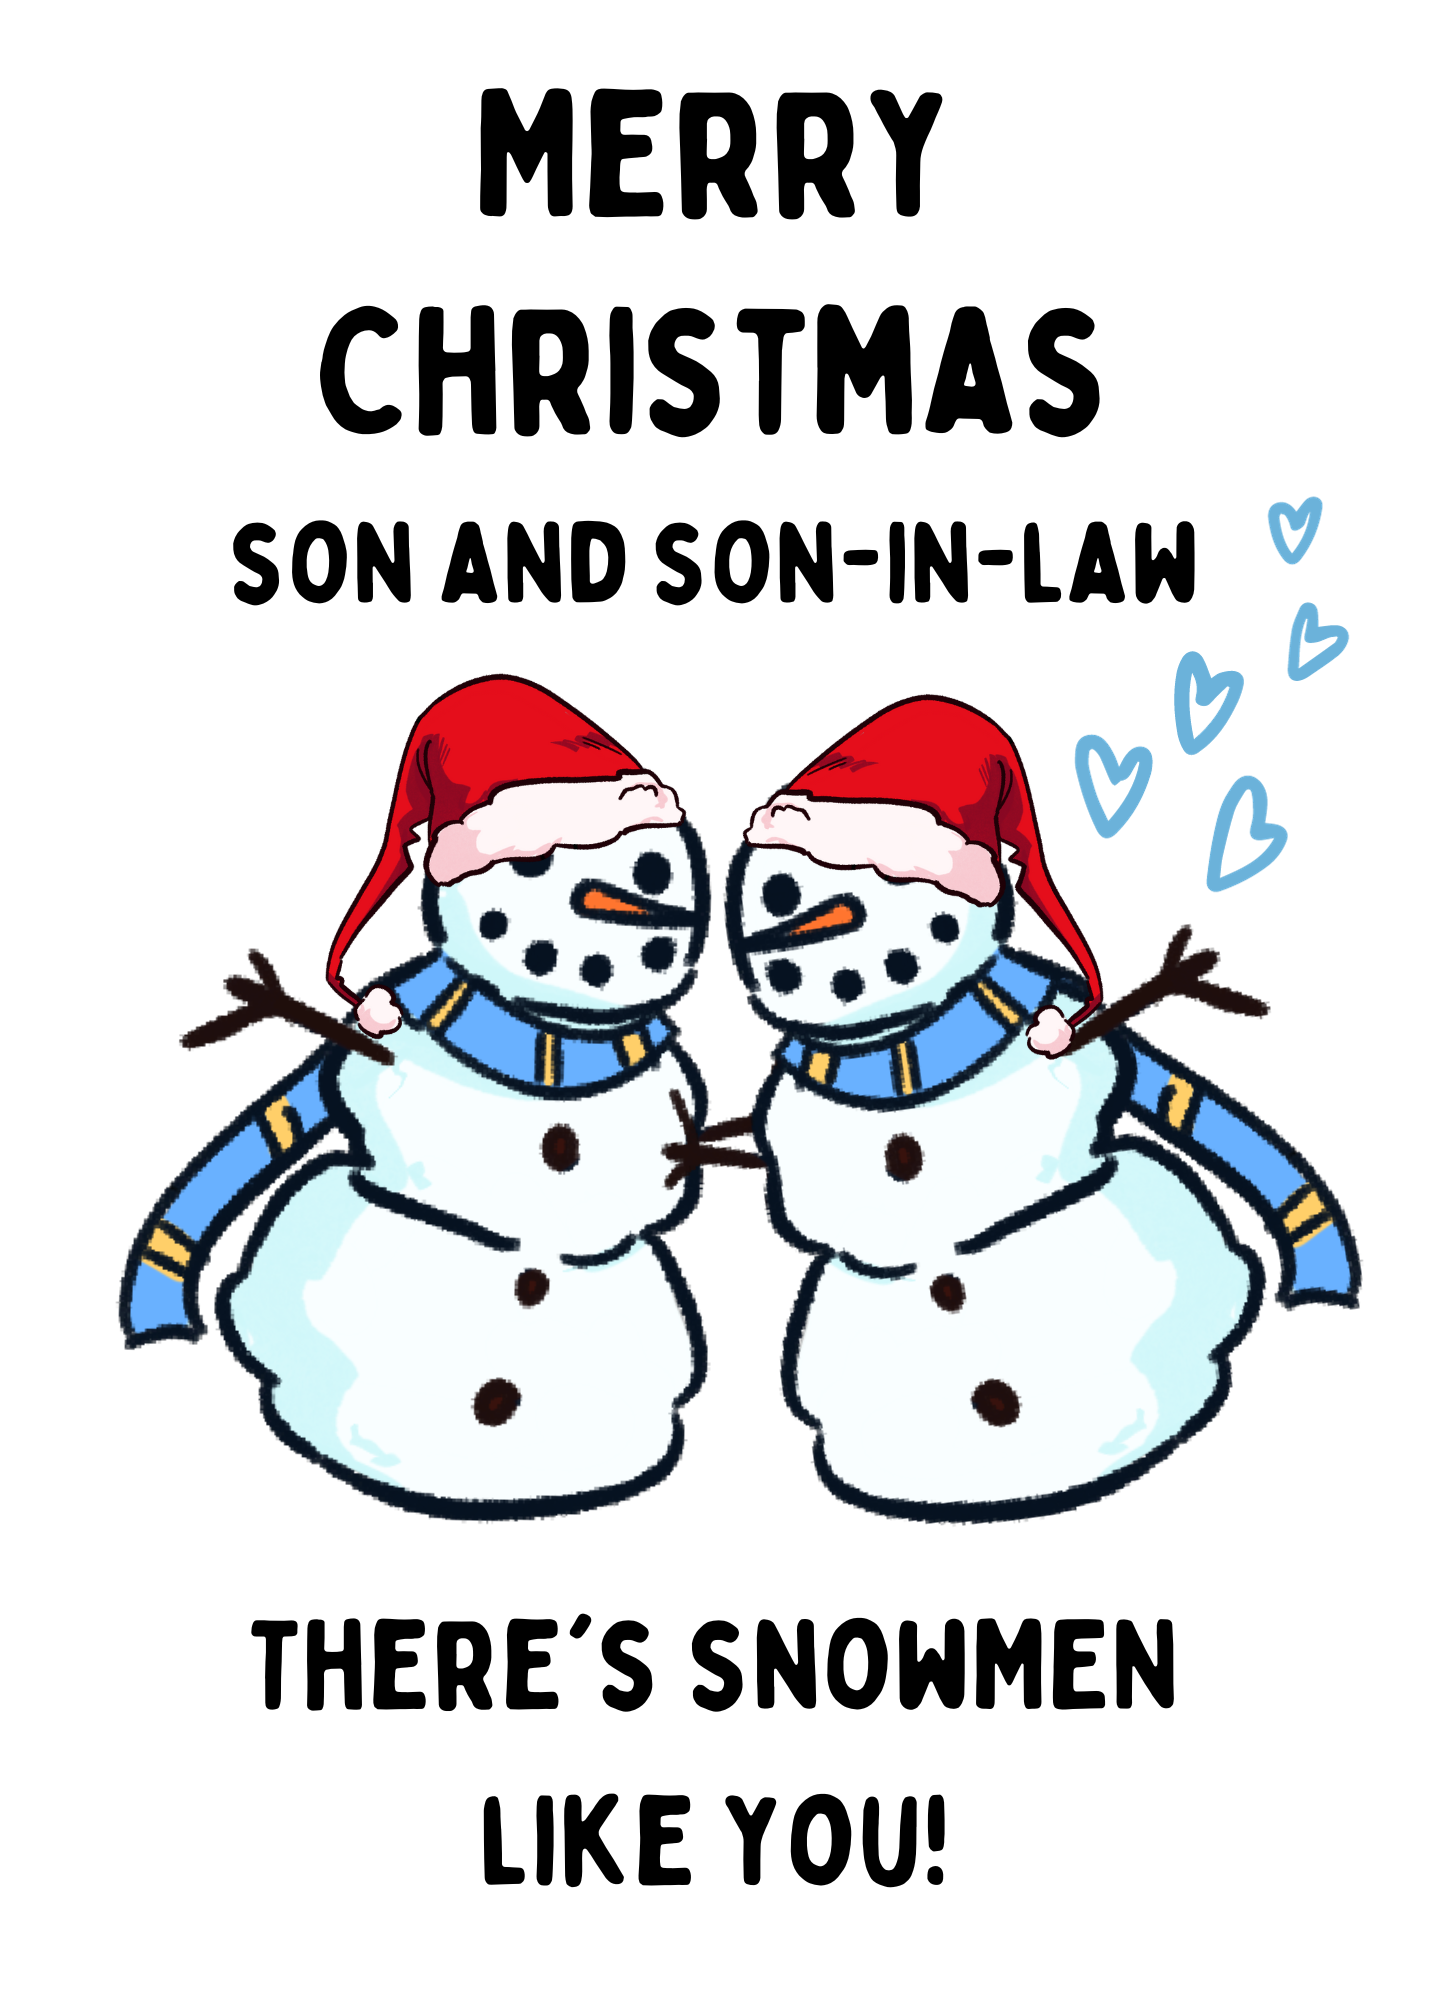 Son and Son-in-law Christmas Card